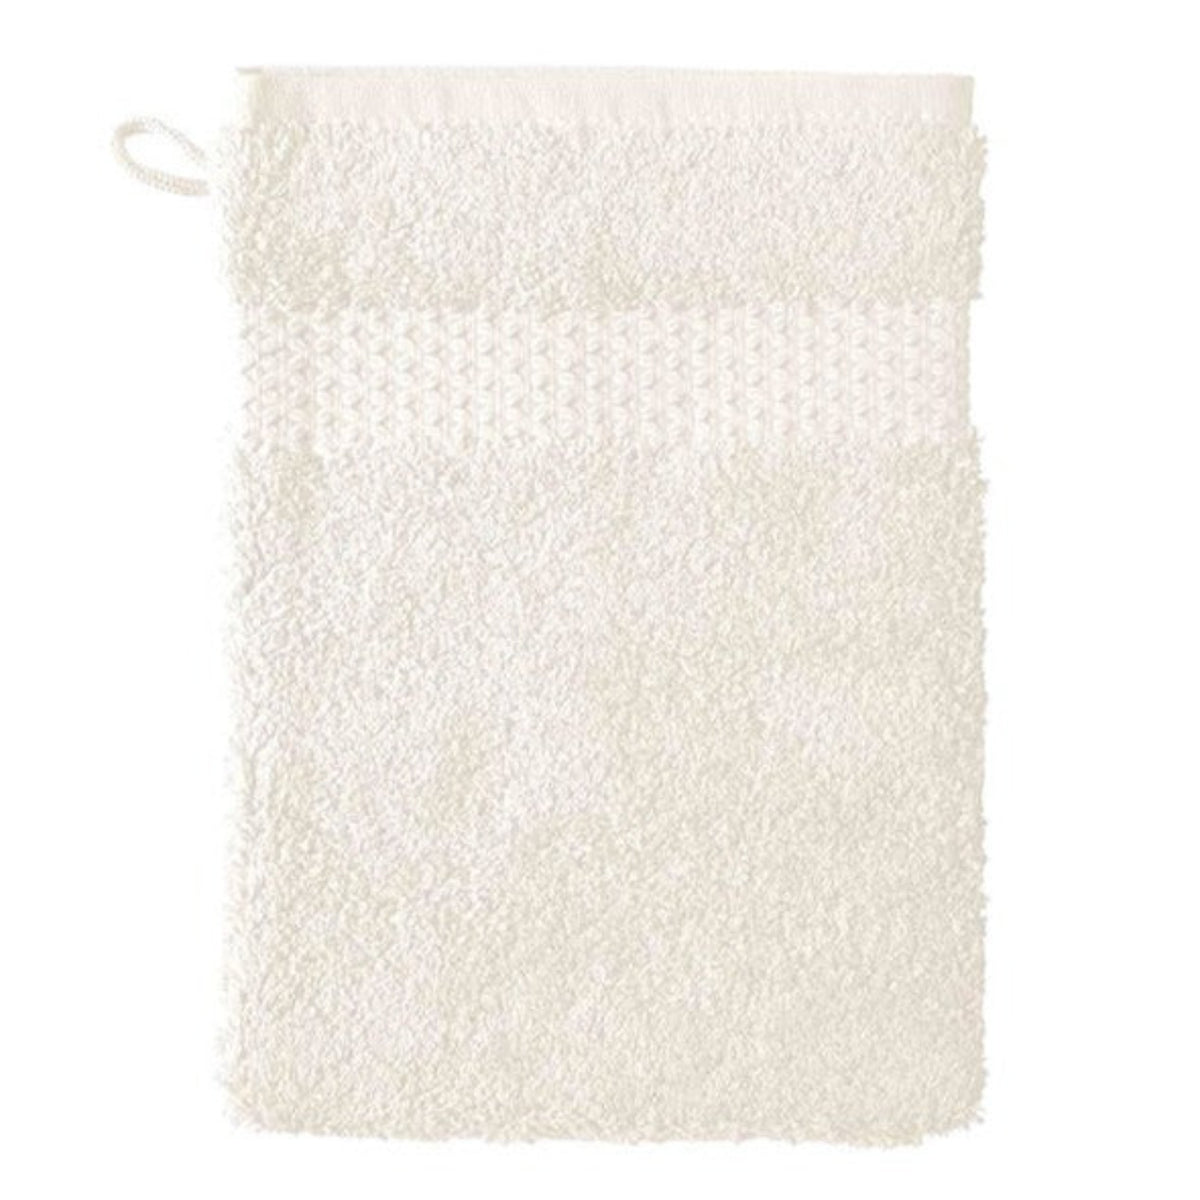 Bath Mitt of Yves Delorme Etoile Bath Collection in Nacre Color